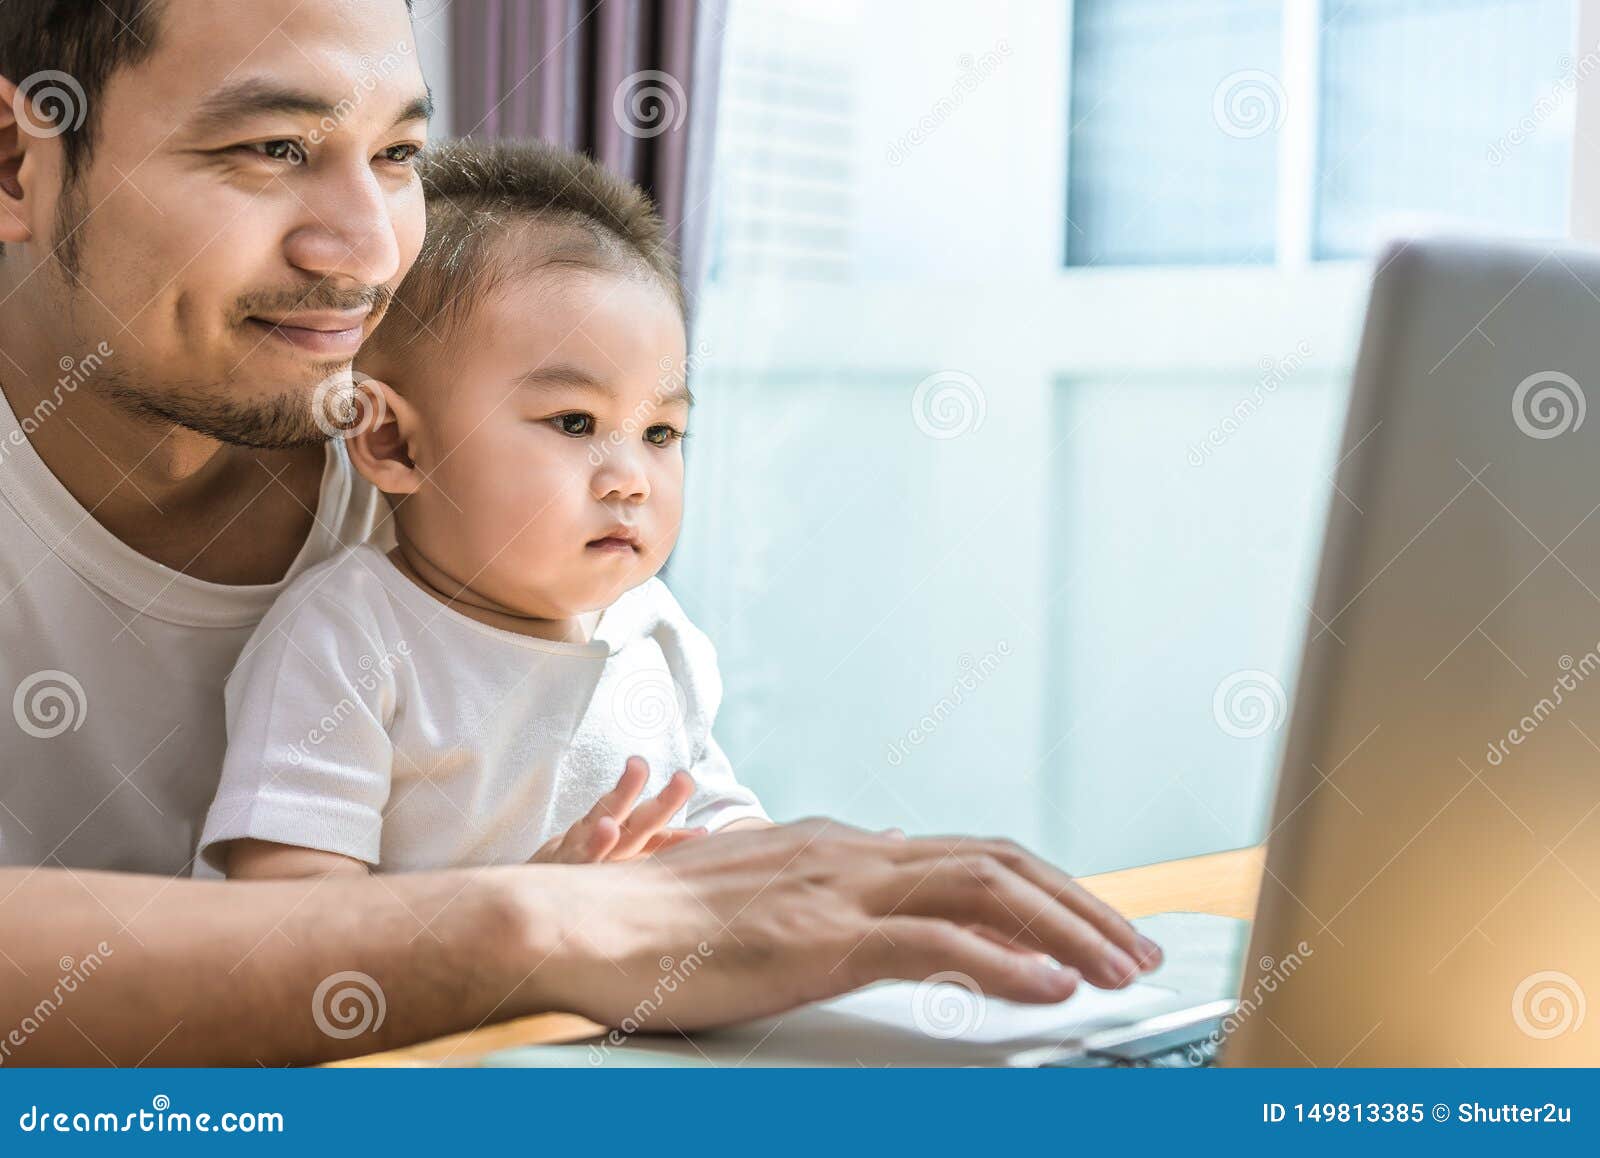 single dad and son using laptop together happily. technology and lifestyles concept. happy familly and baby theme